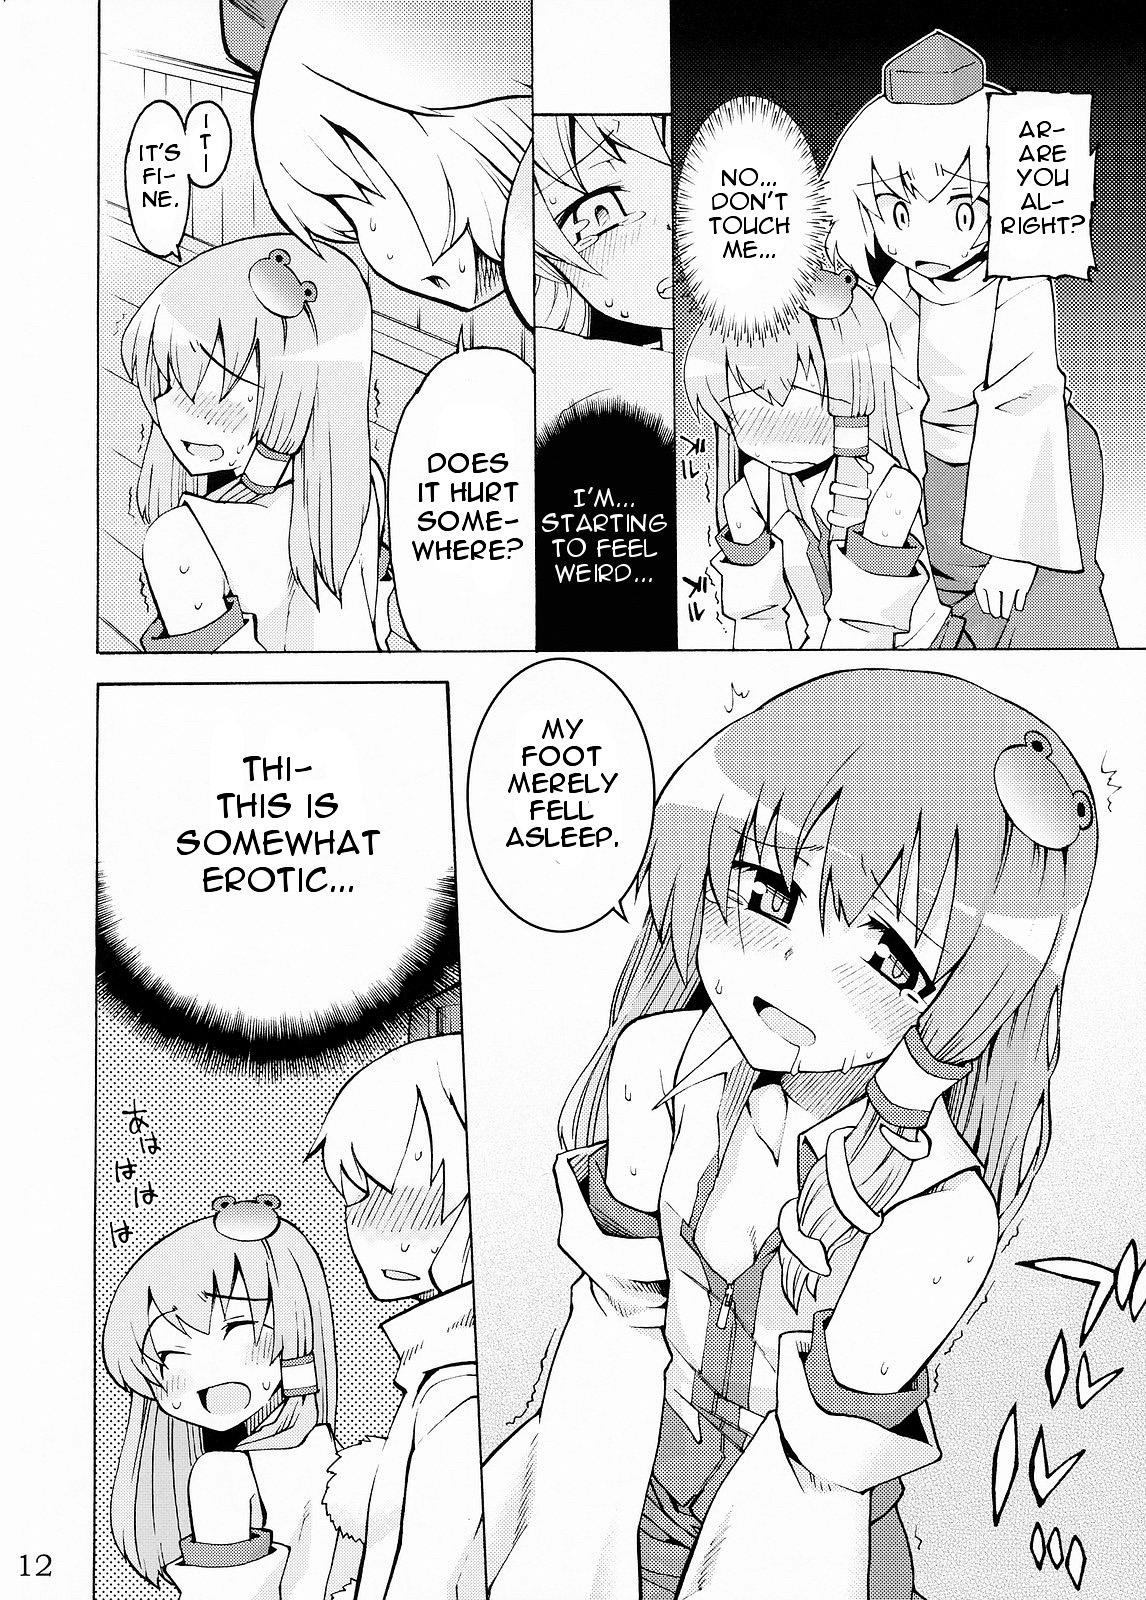 Rico Kami-sama to Issho! Happy every day! - Touhou project Cuckold - Page 12